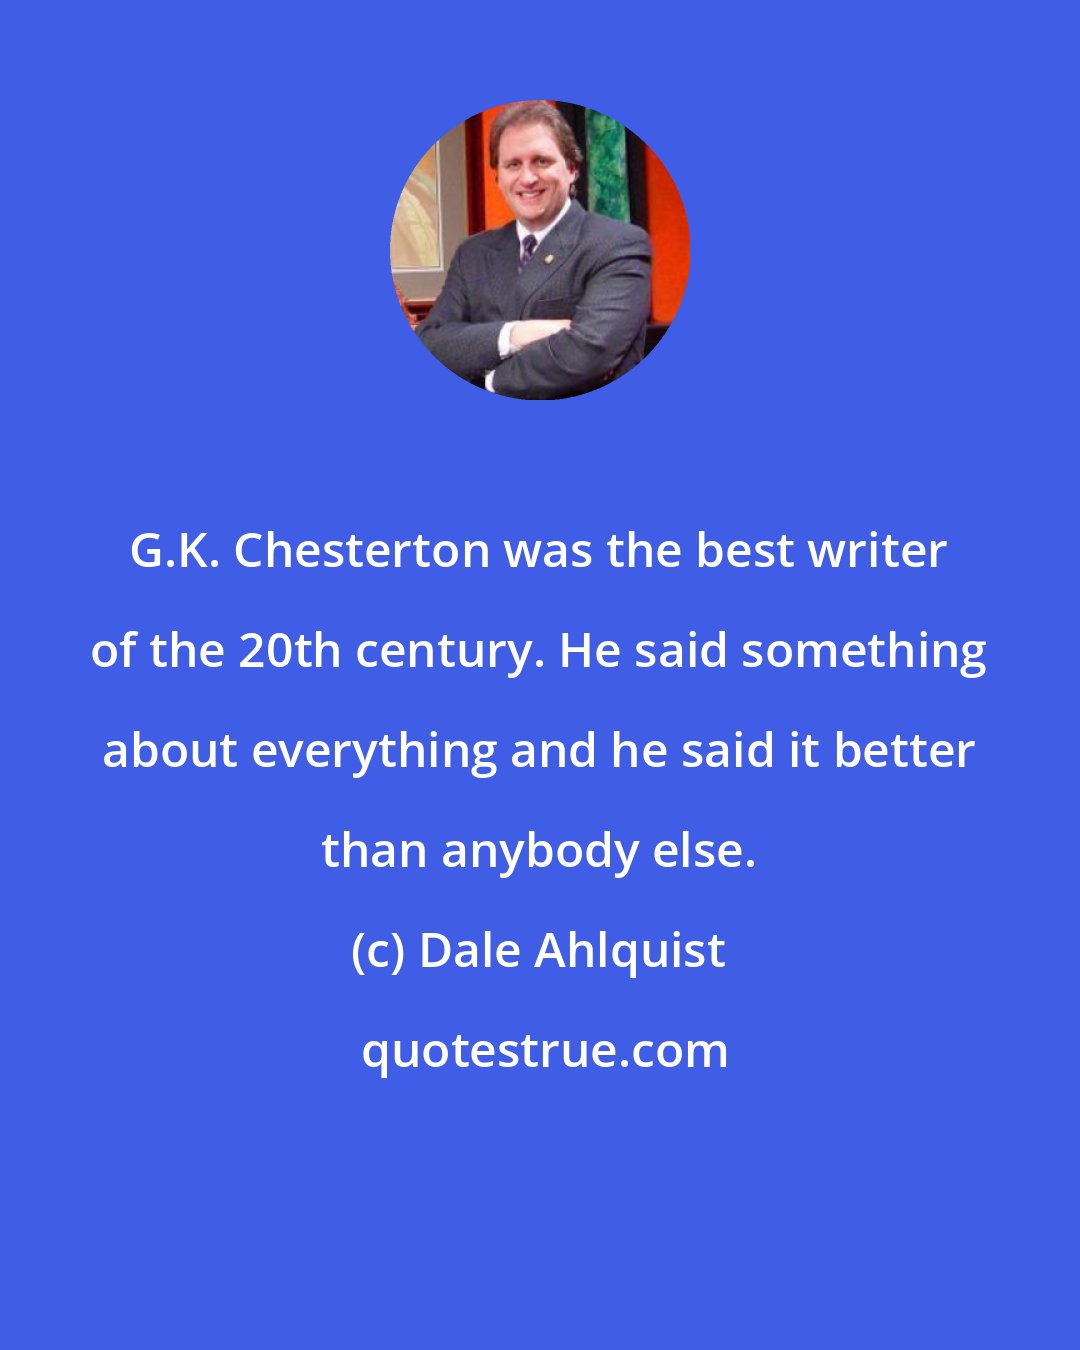 Dale Ahlquist: G.K. Chesterton was the best writer of the 20th century. He said something about everything and he said it better than anybody else.